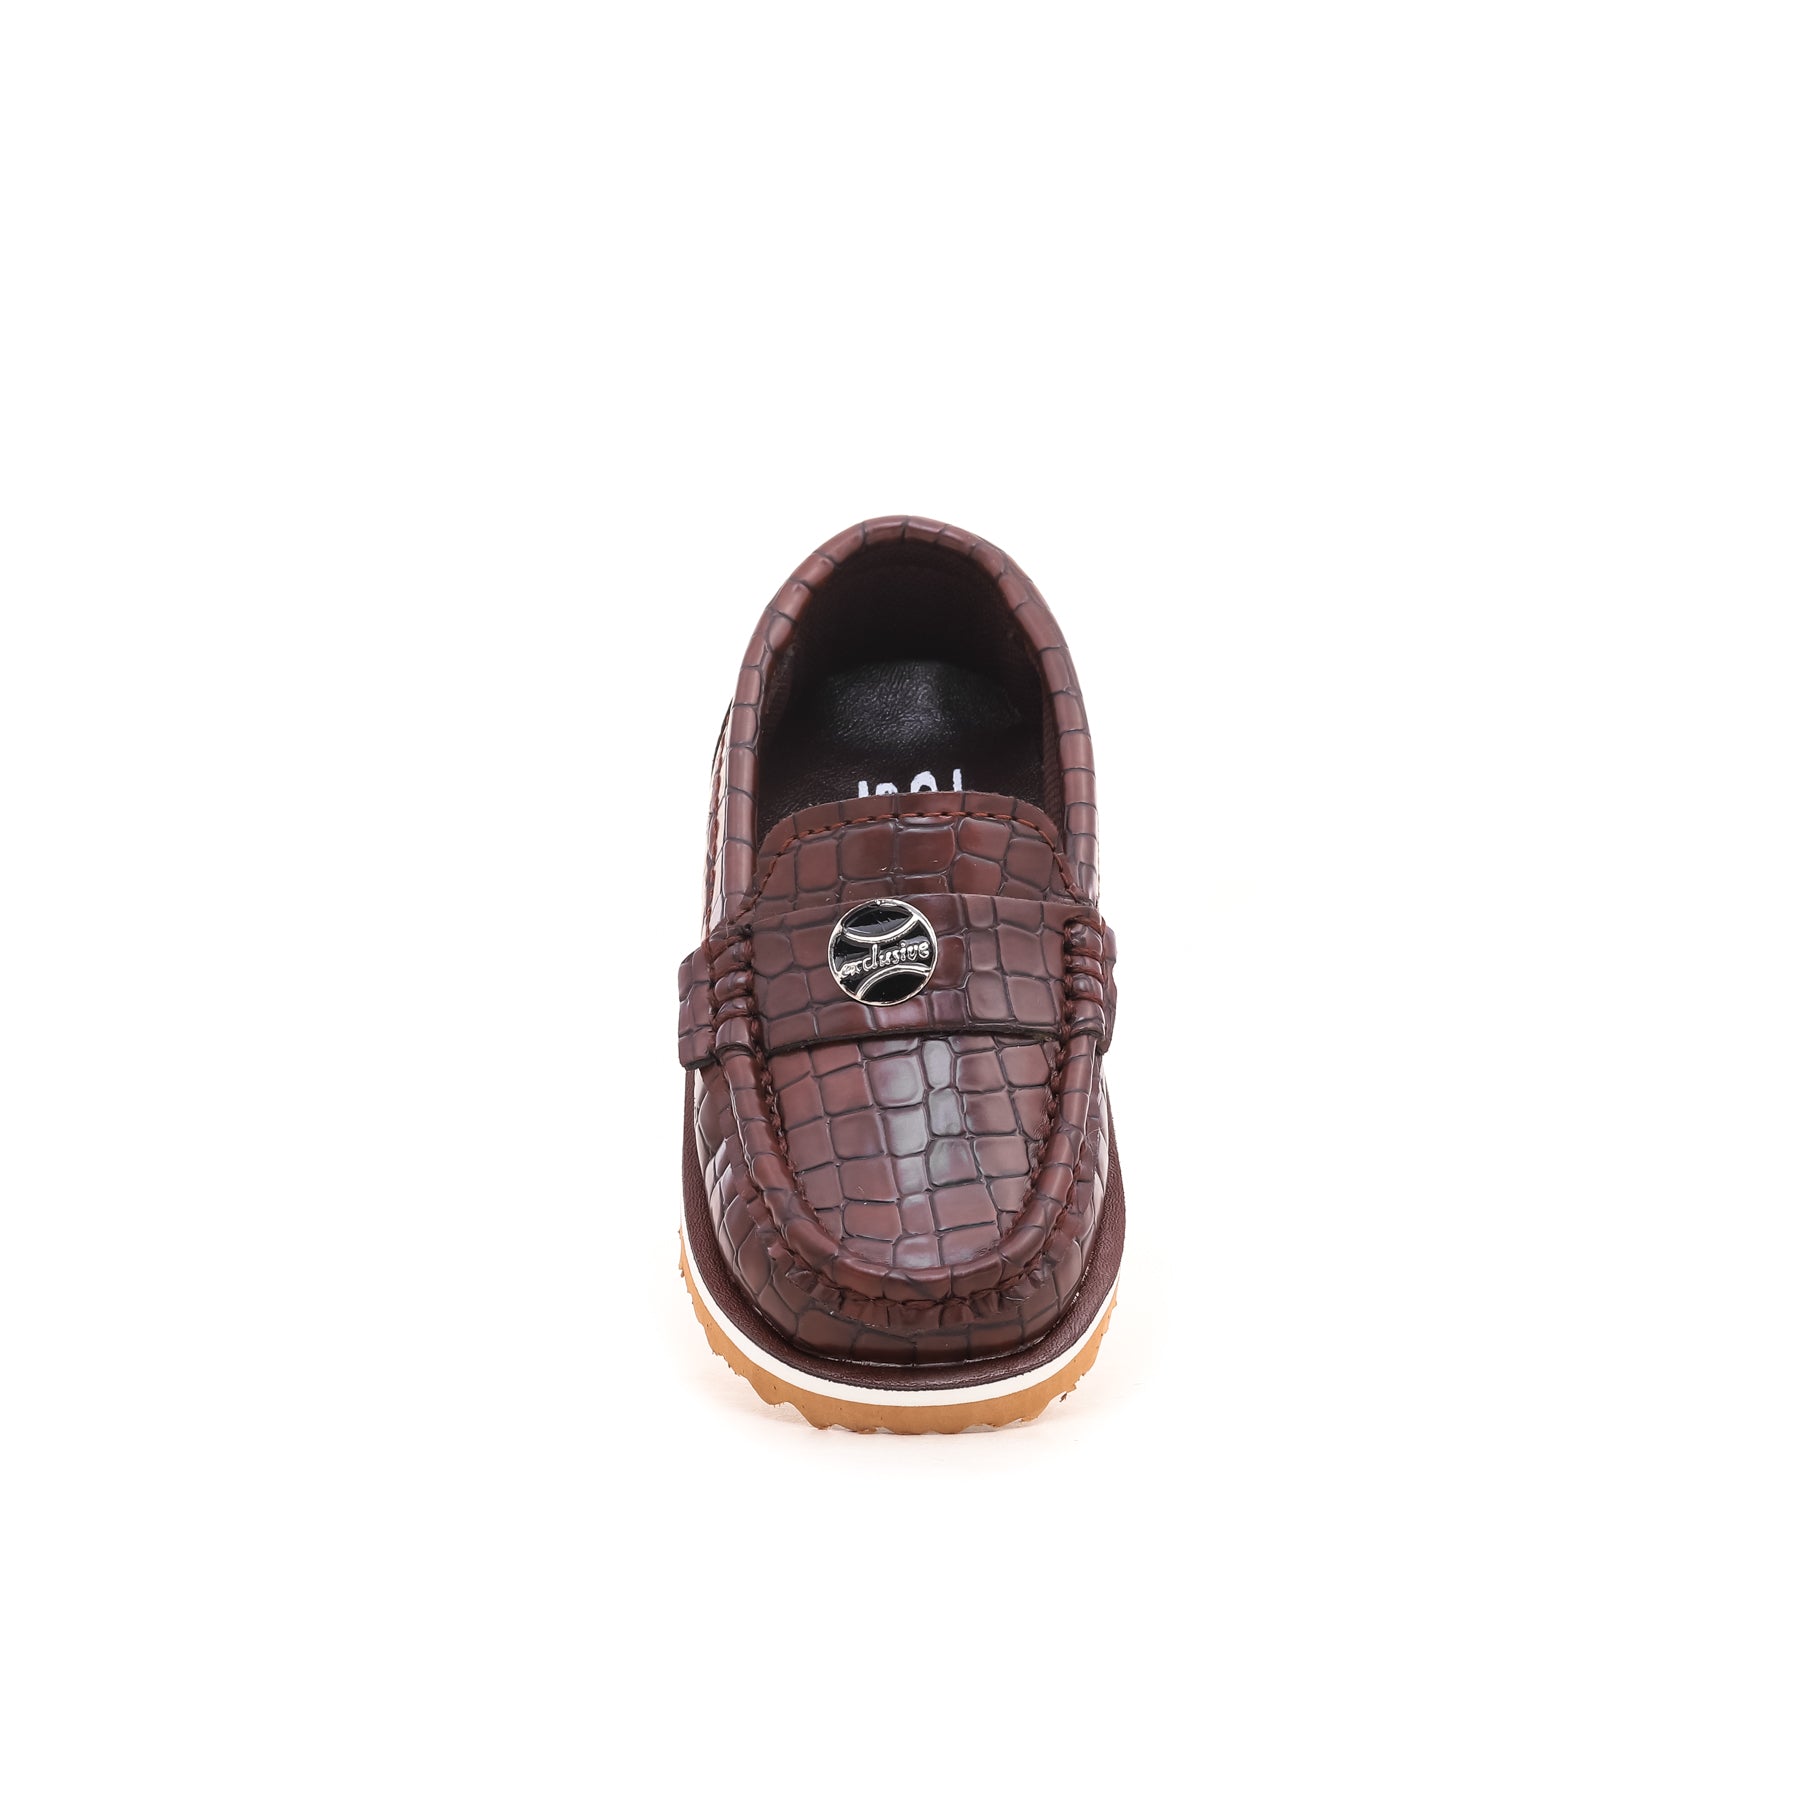 Boys Brown Casual Moccasins KD0525